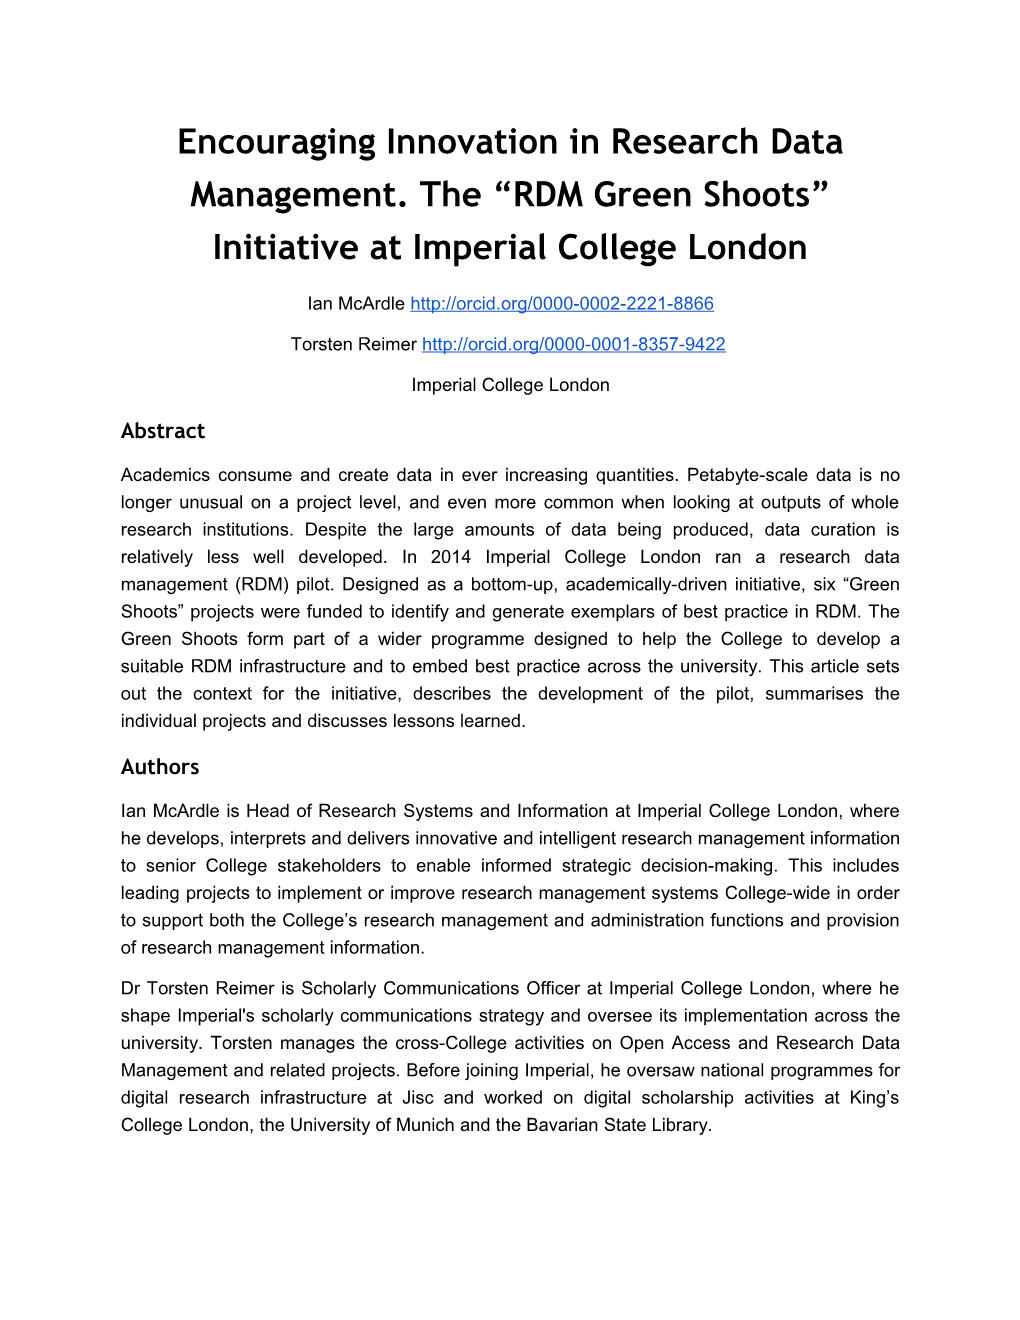 Encouraging Innovation in Research Data Management. the RDM Green Shoots Initiative At